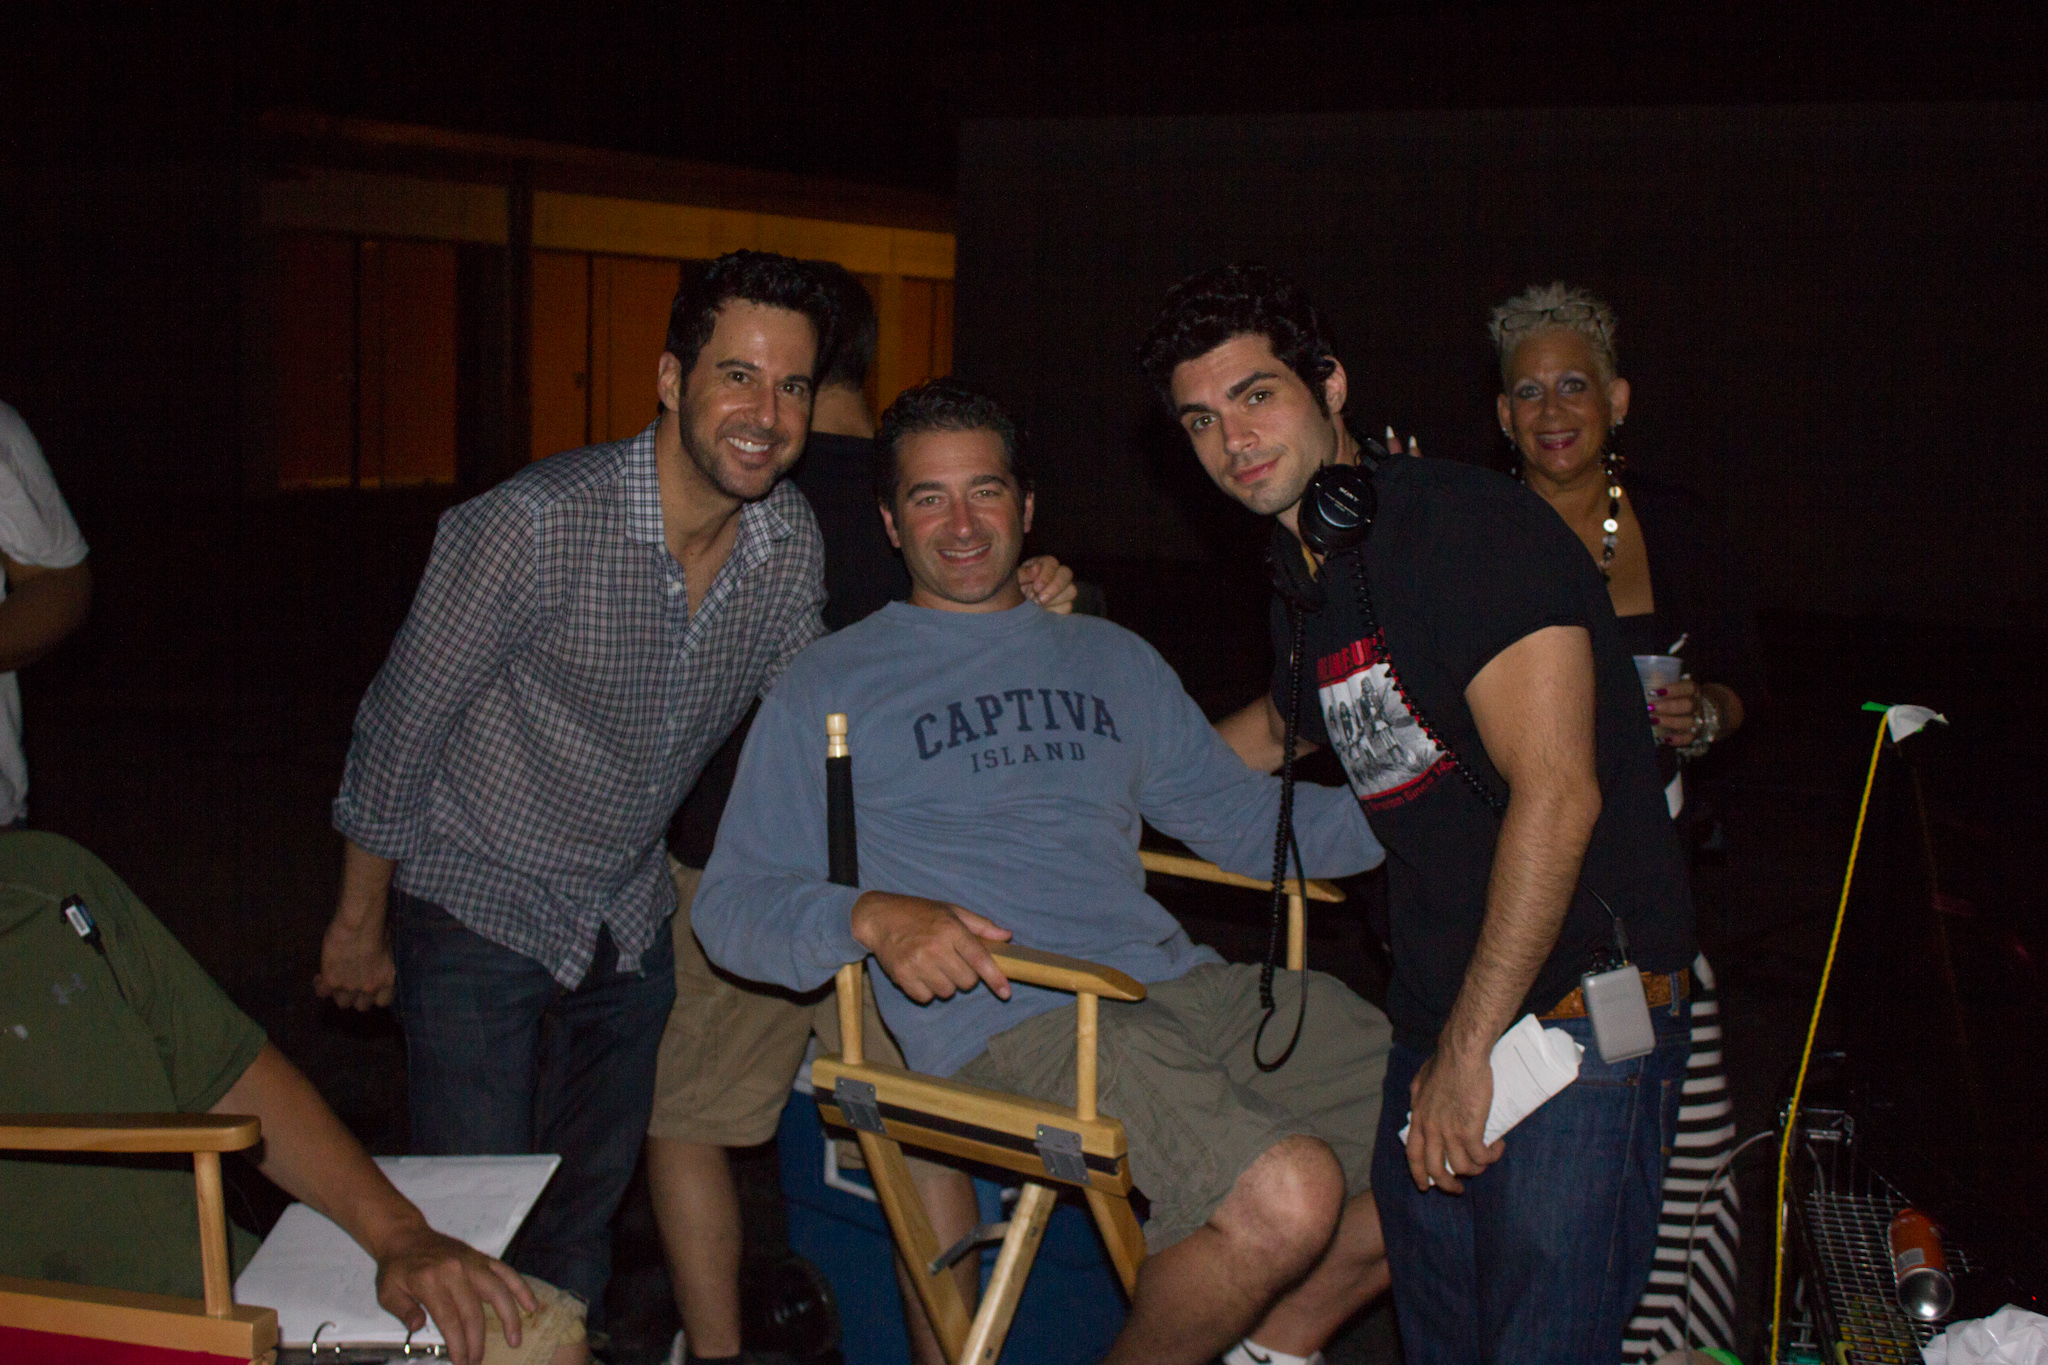 Tom DeNucci on the set of Self Storage with Jonathan Silverman and Chad A. Verdi